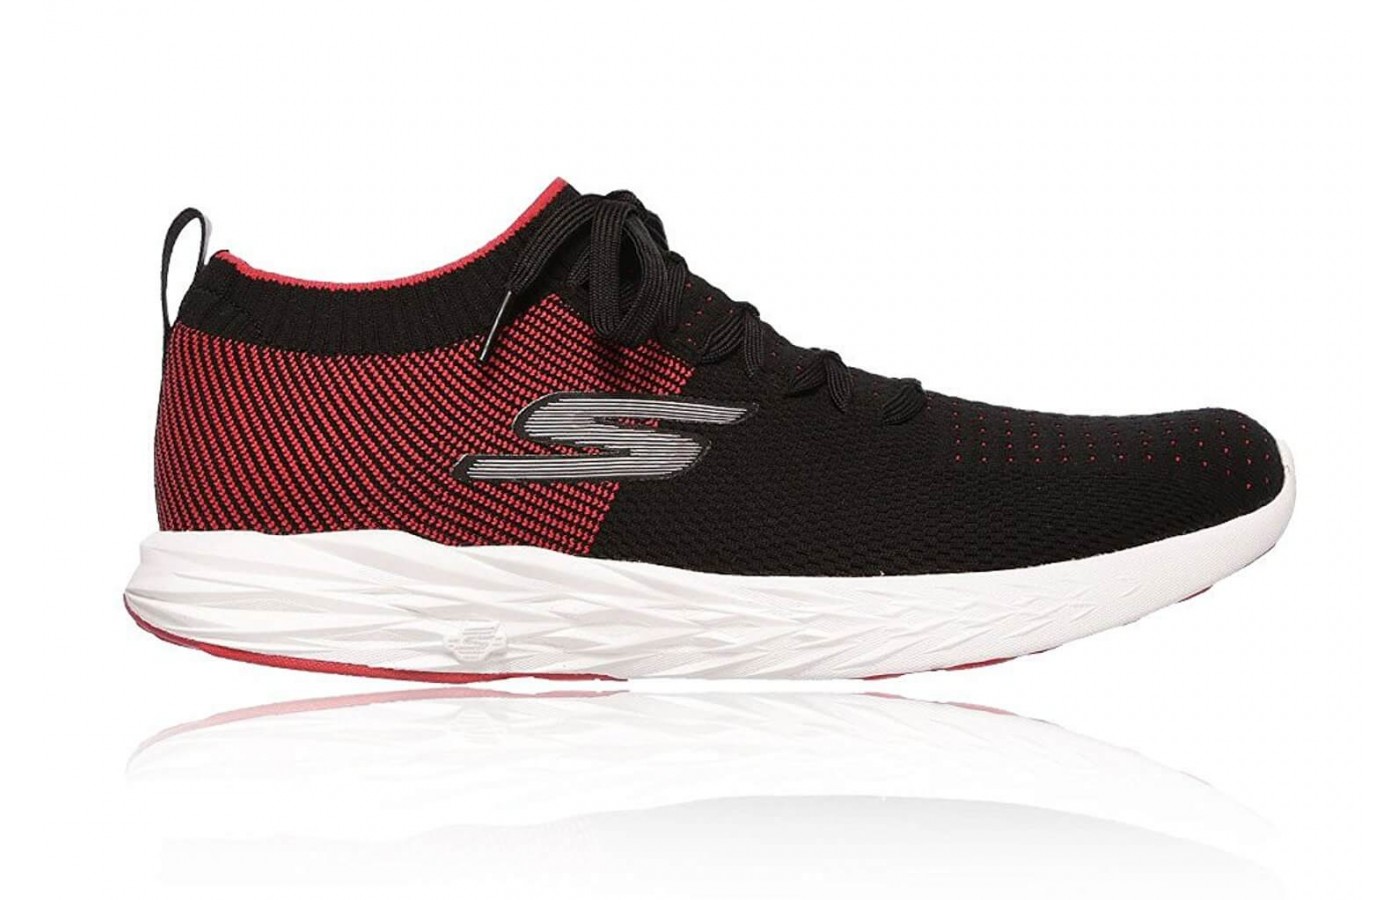 The Skechers GoRun 6 features reflective detailing